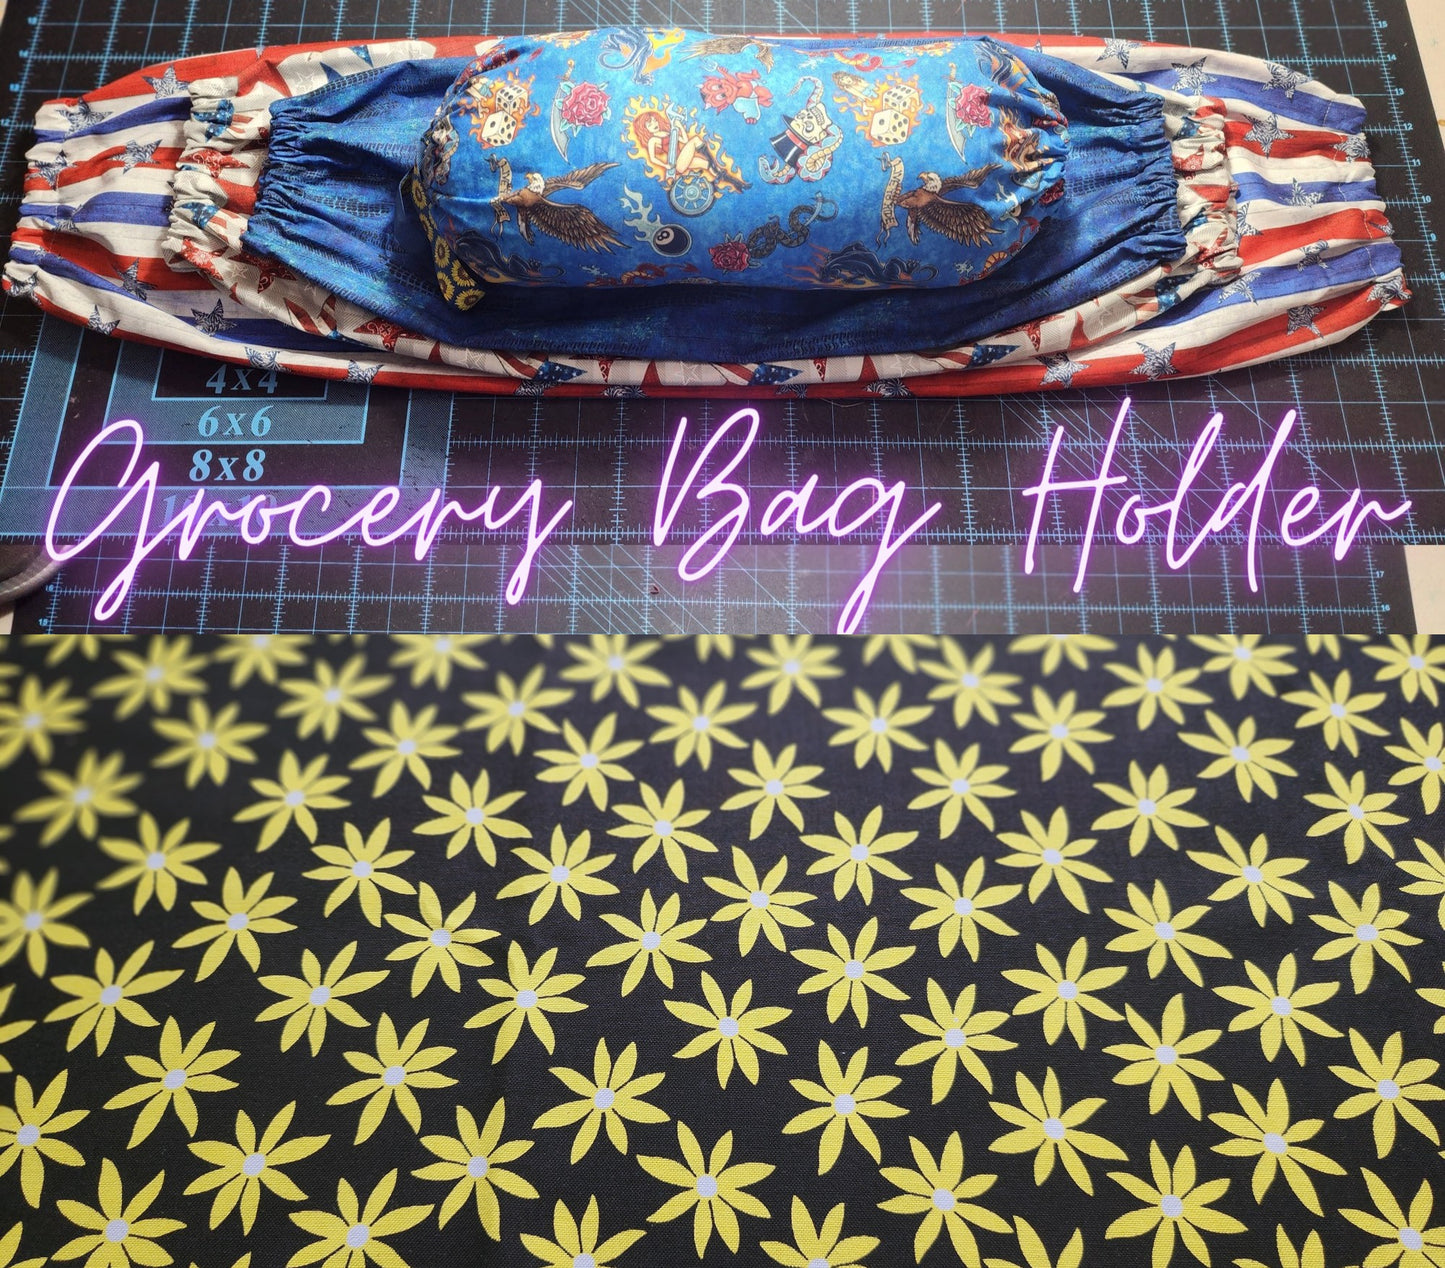 Yellow Daisies, SMALL Grocery Bag Holder | Pre-cut just needs sewn together